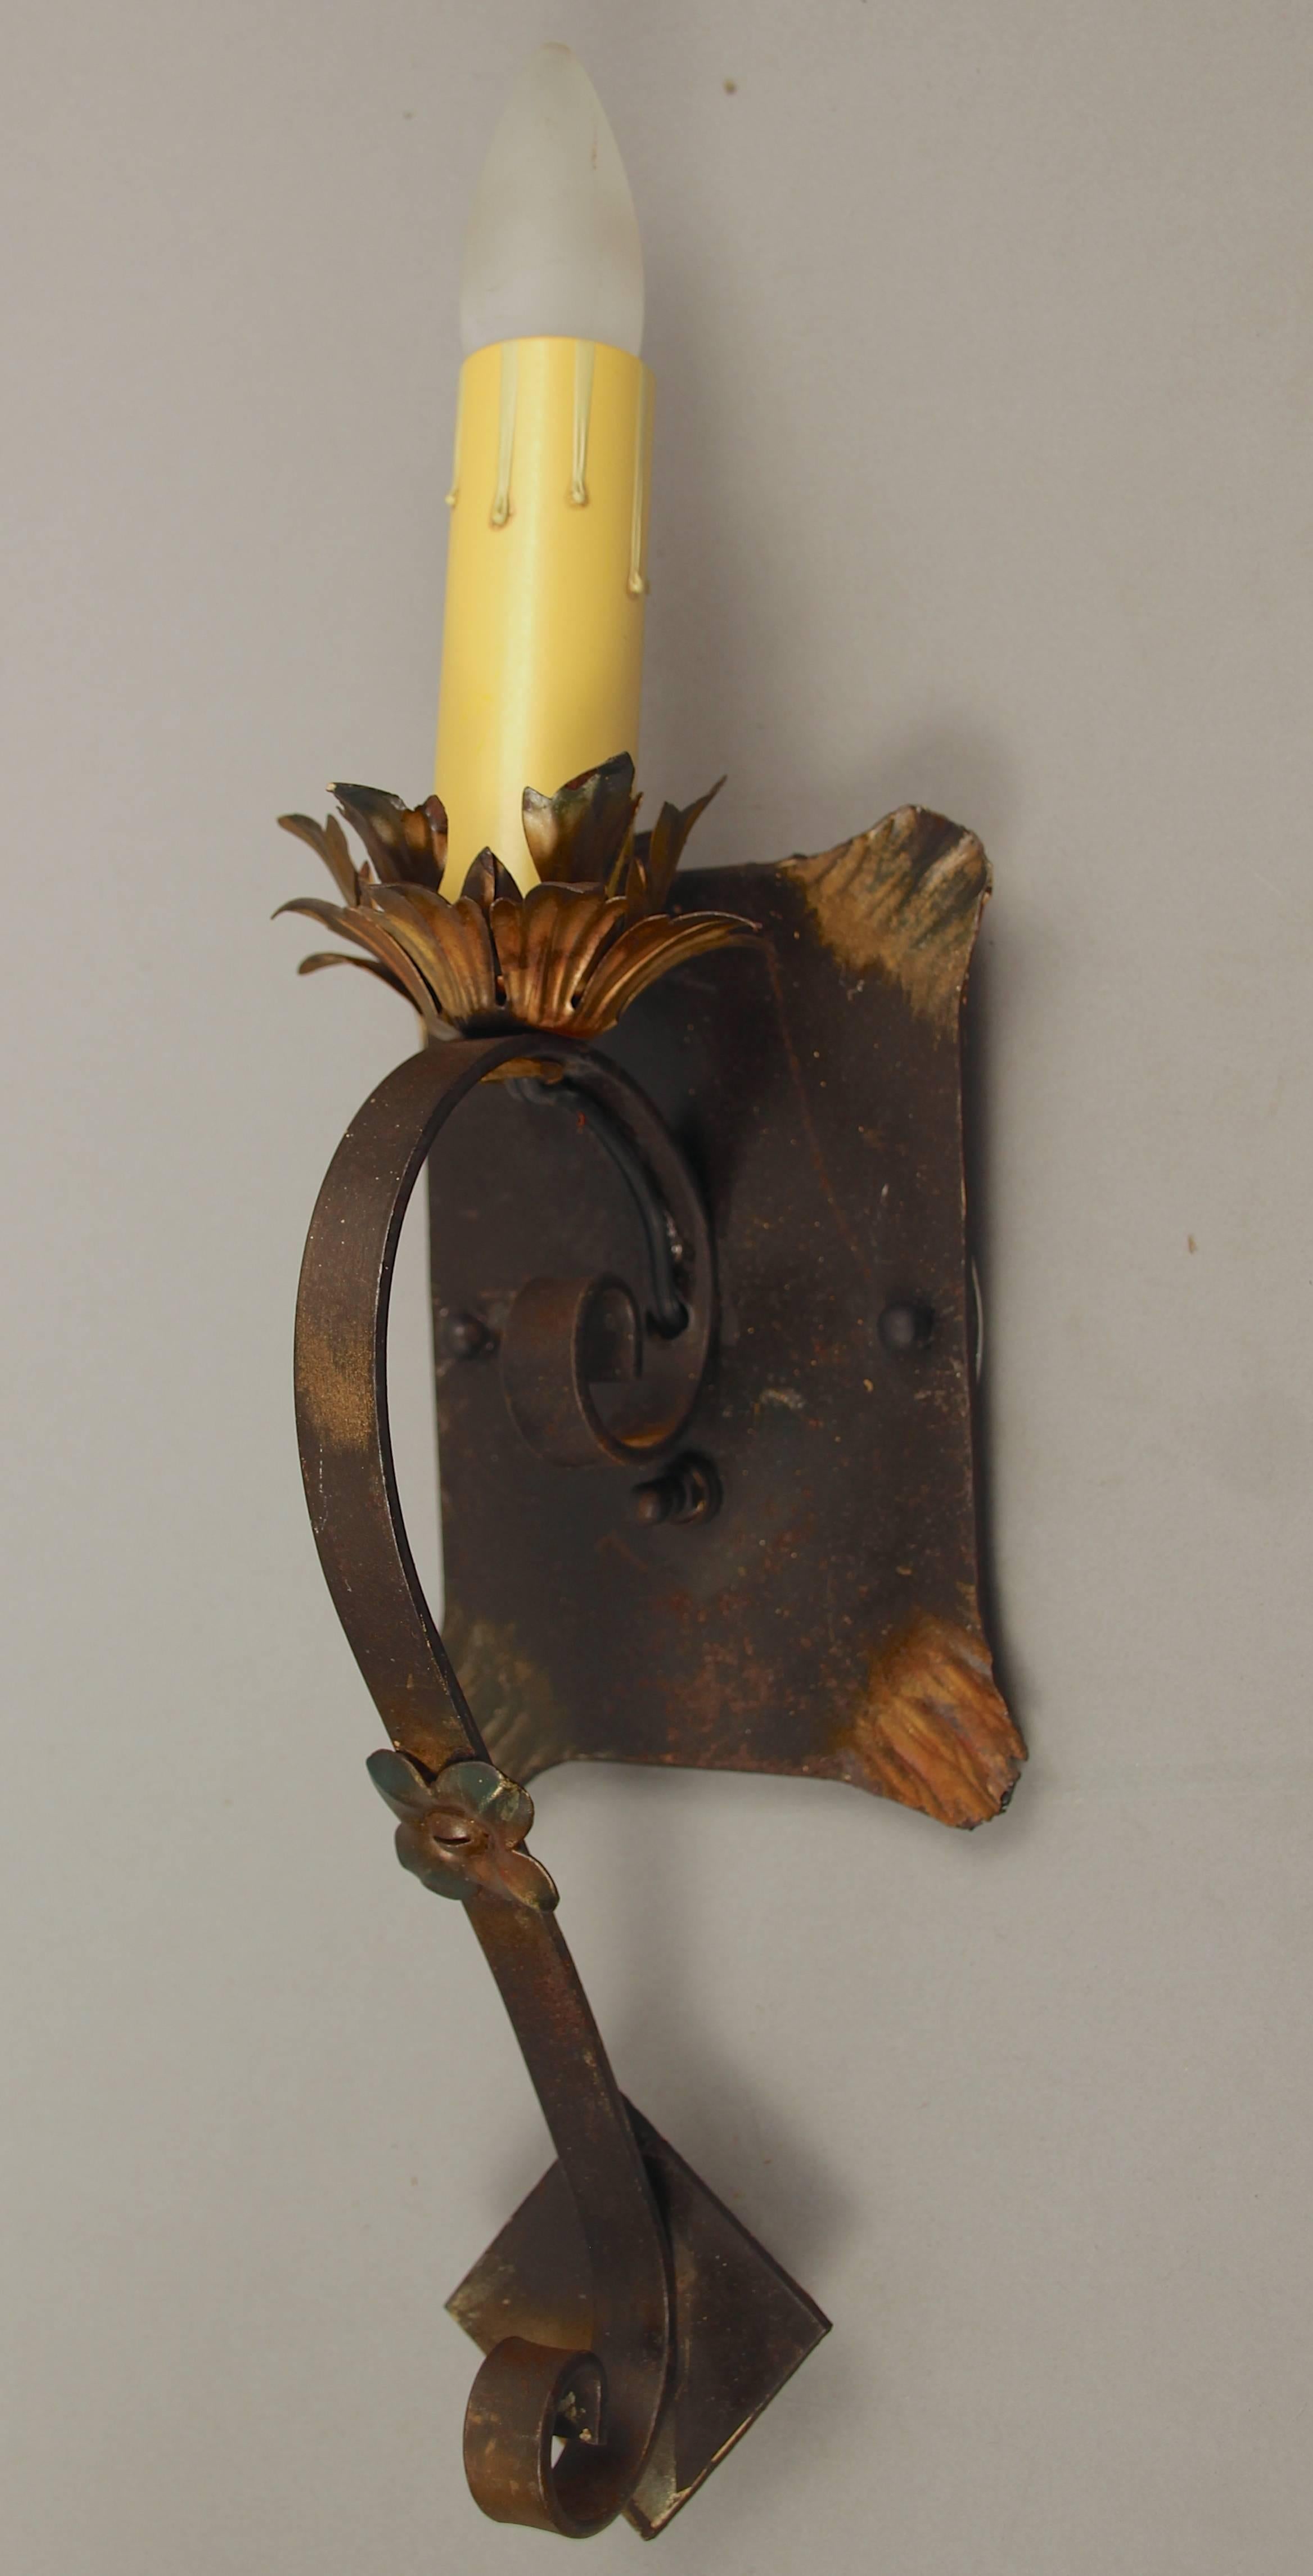 1920s wrought iron sconces with original gold-tone accents and finish.